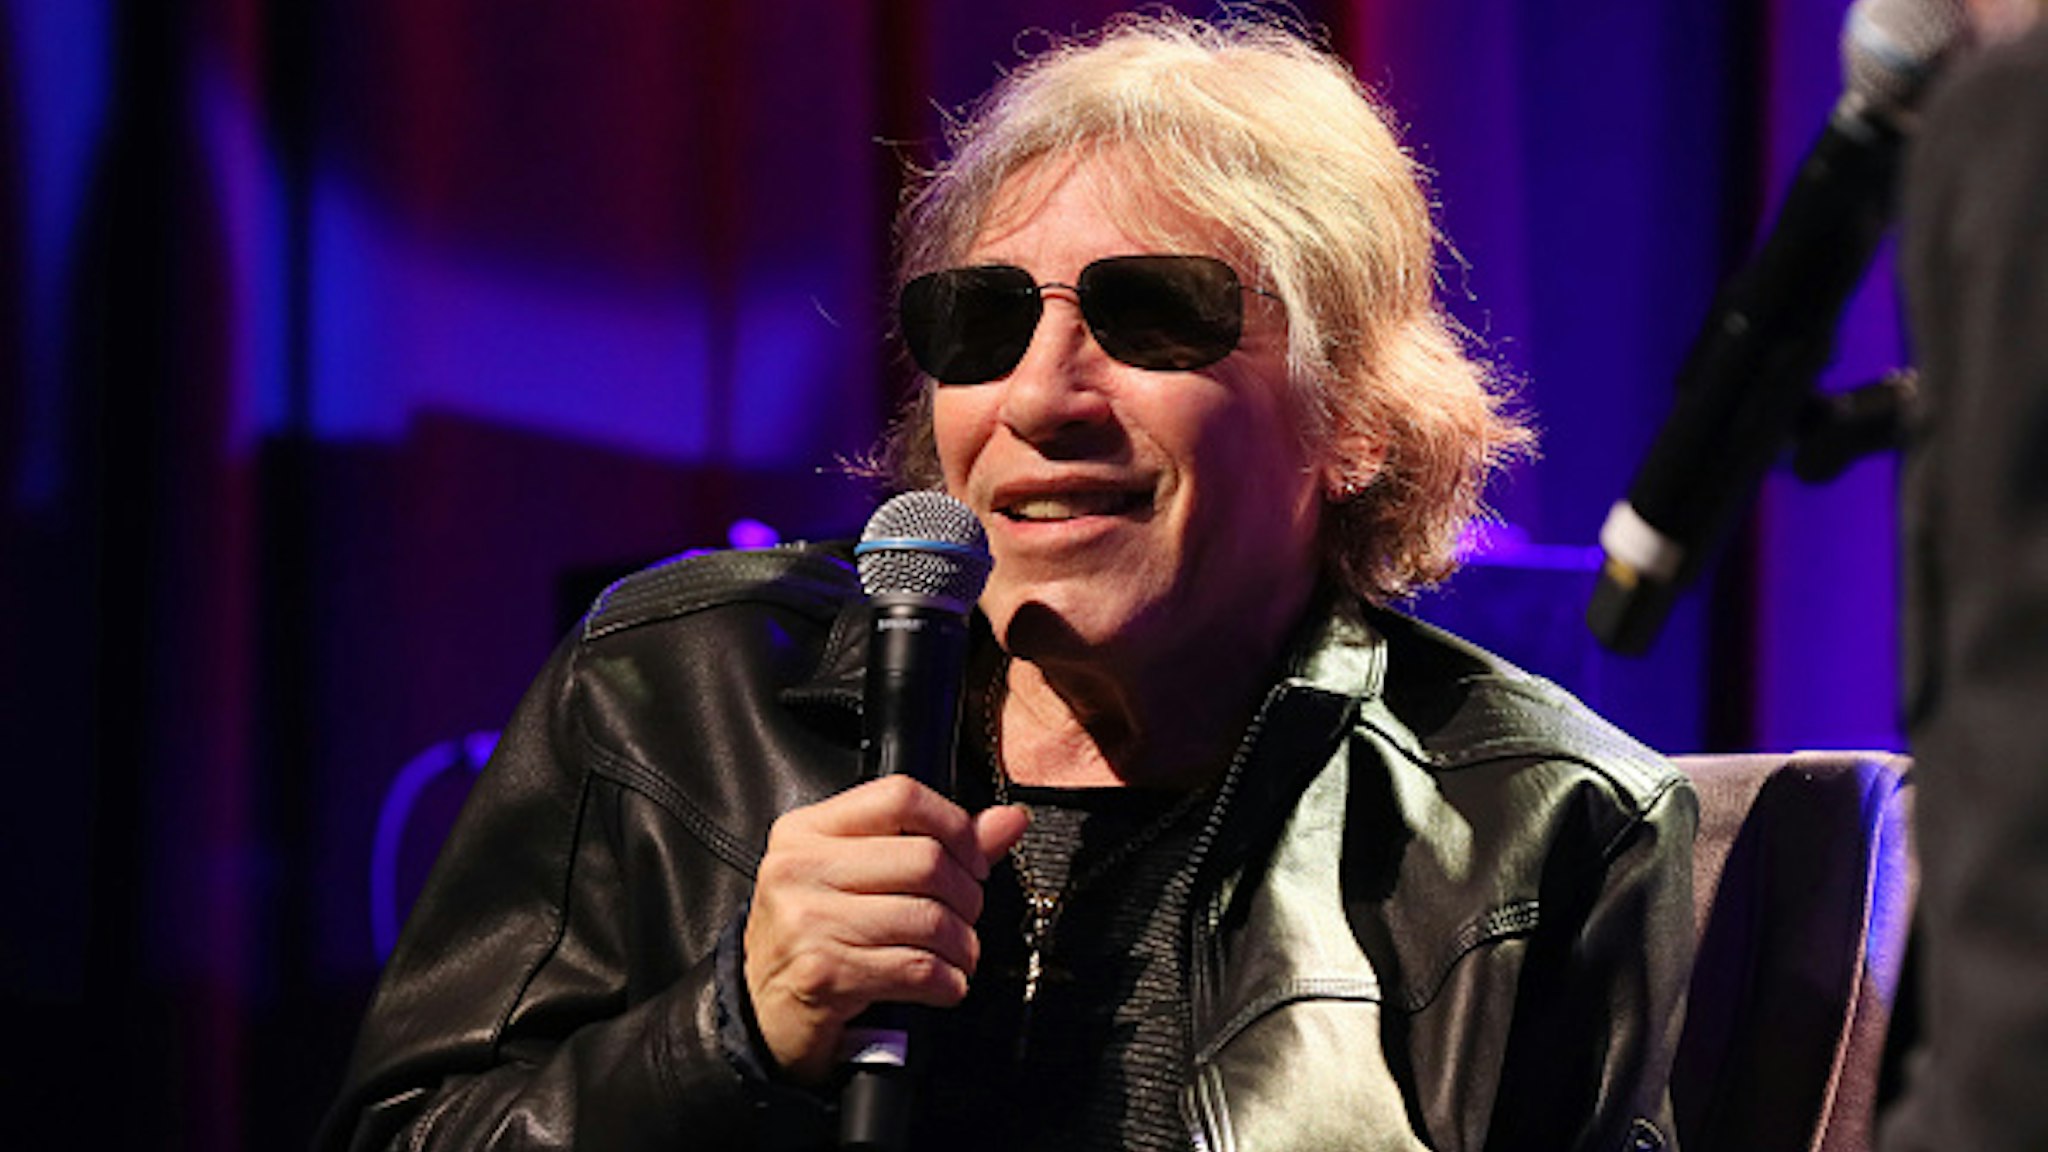 LOS ANGELES, CALIFORNIA - FEBRUARY 11: José Feliciano speaks onstage at An Evening With José Feliciano at the GRAMMY Museum on February 11, 2020 in Los Angeles, California.